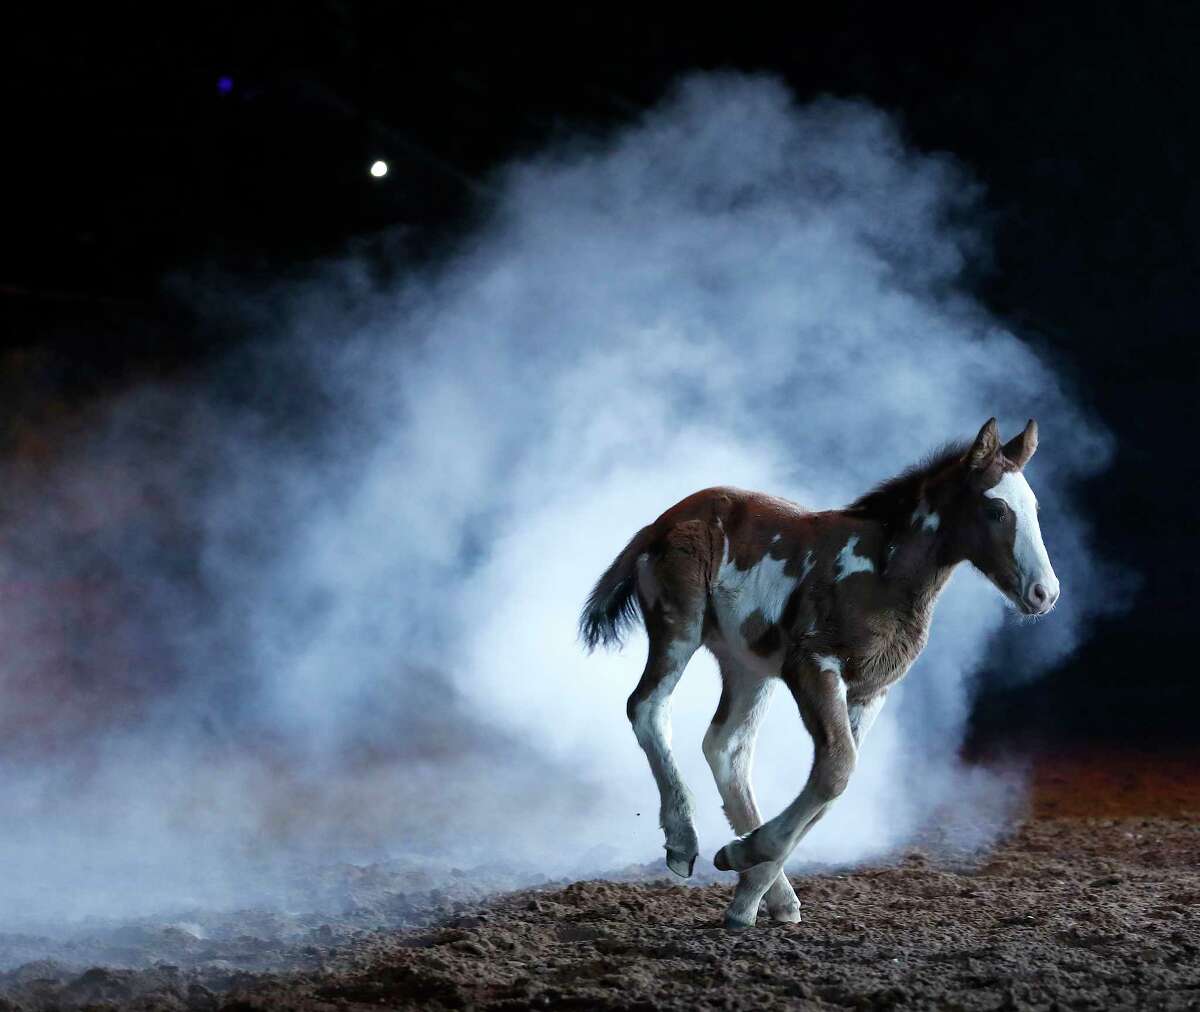 Painted Hostage, daughter of the recently retired 20-year-old bucking horse Hostage﻿runs through the smoke as her mother was honored in Houston.﻿